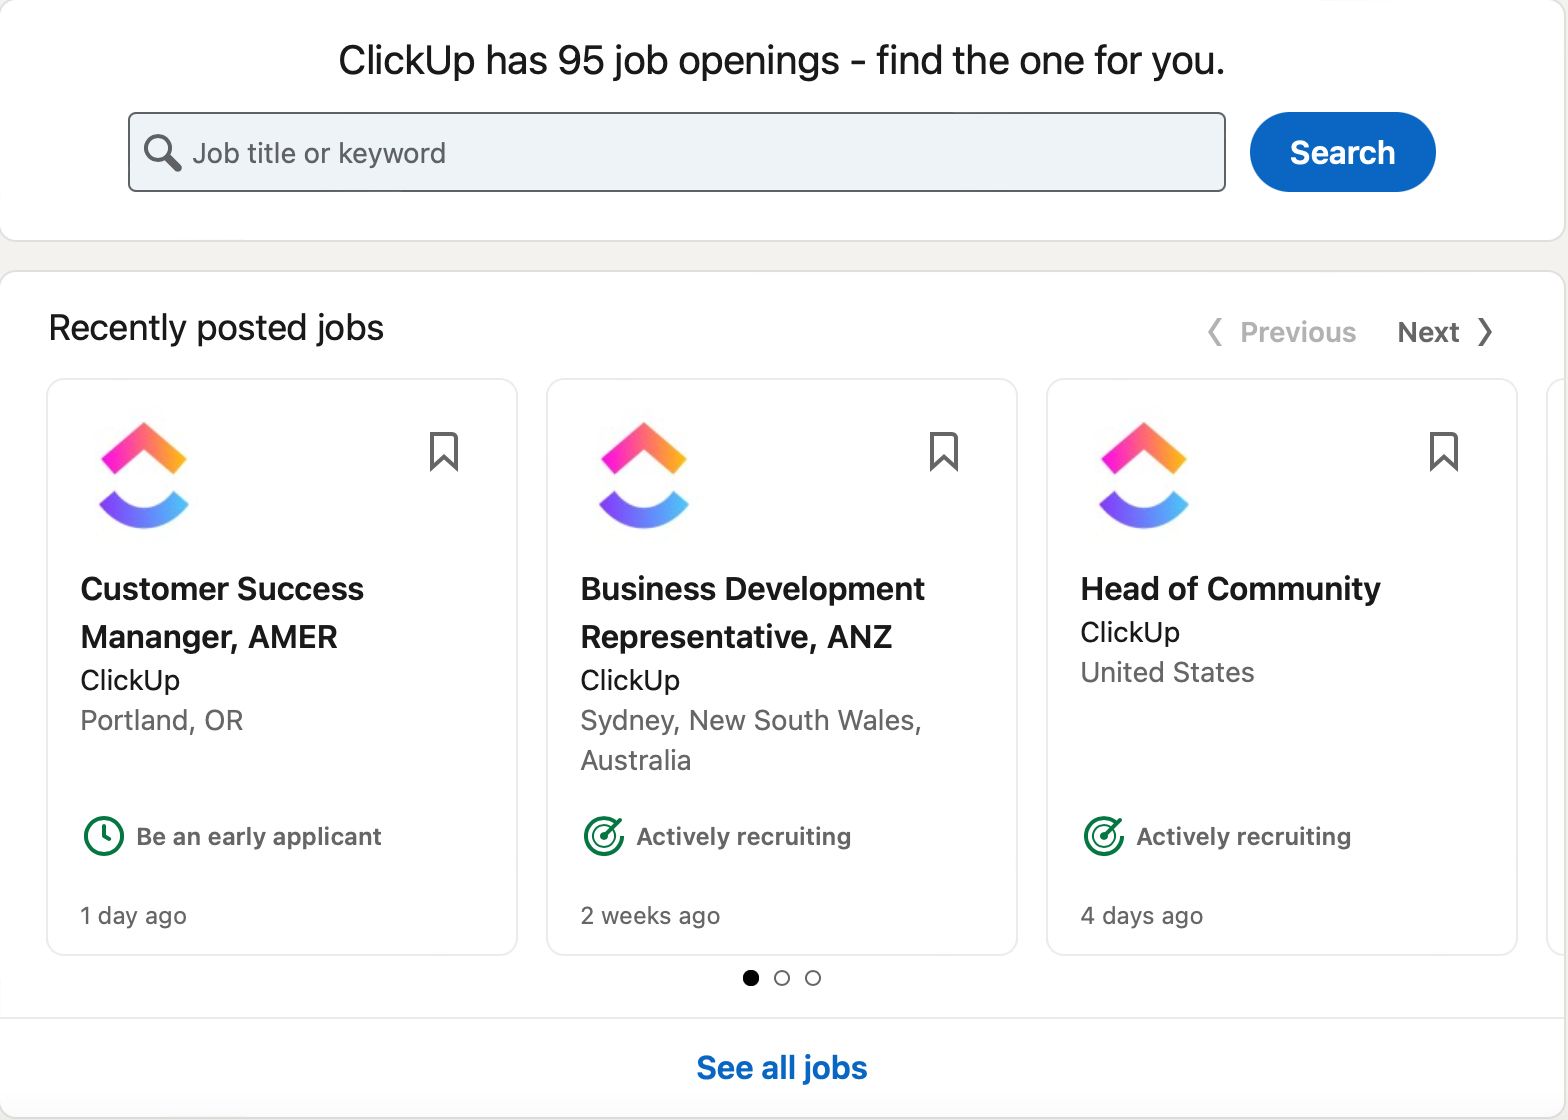 Job posting and seeking is a key feature of LinkedIn example ClickUp